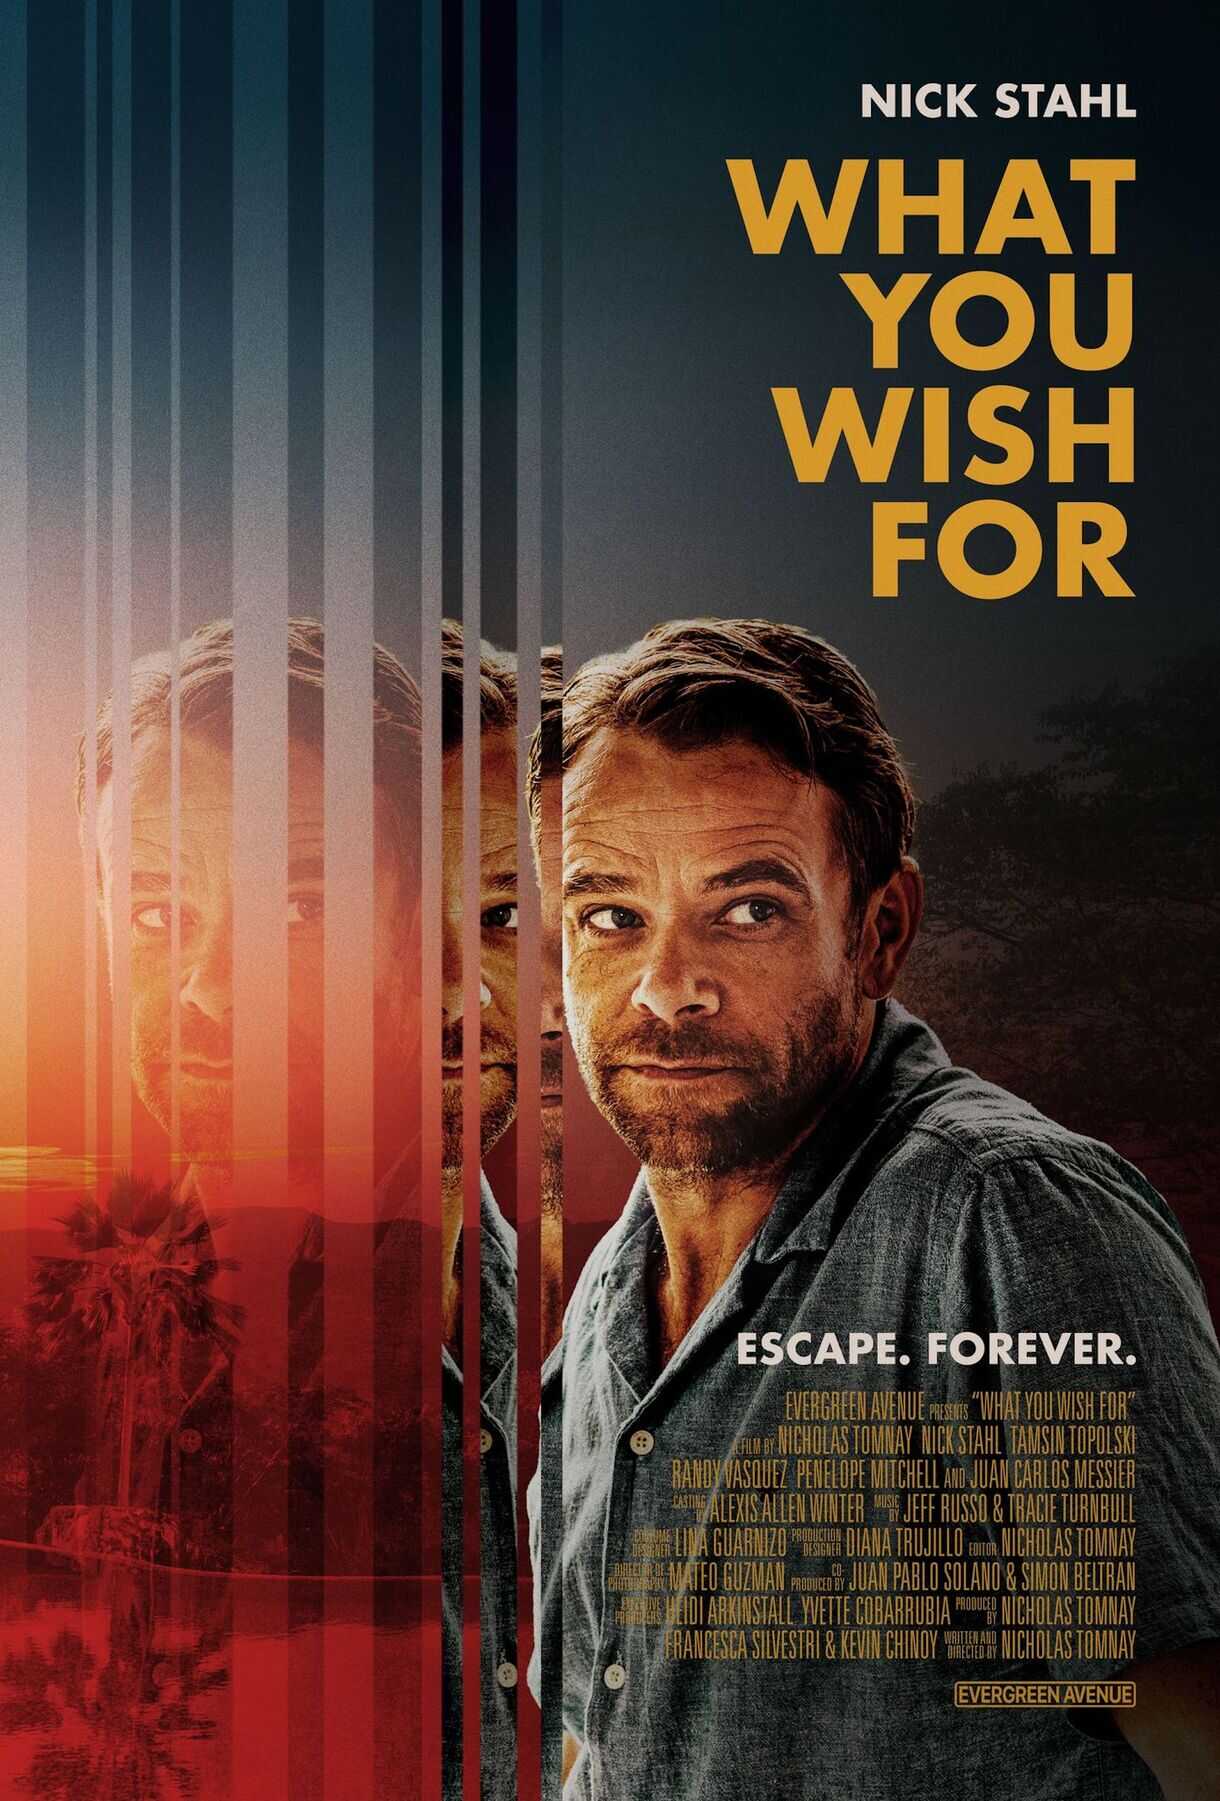 THEATRICAL POSTER FOR WHAT YOU WISH FOR, DIRECTED BY NICHOLAS TOMNAY.